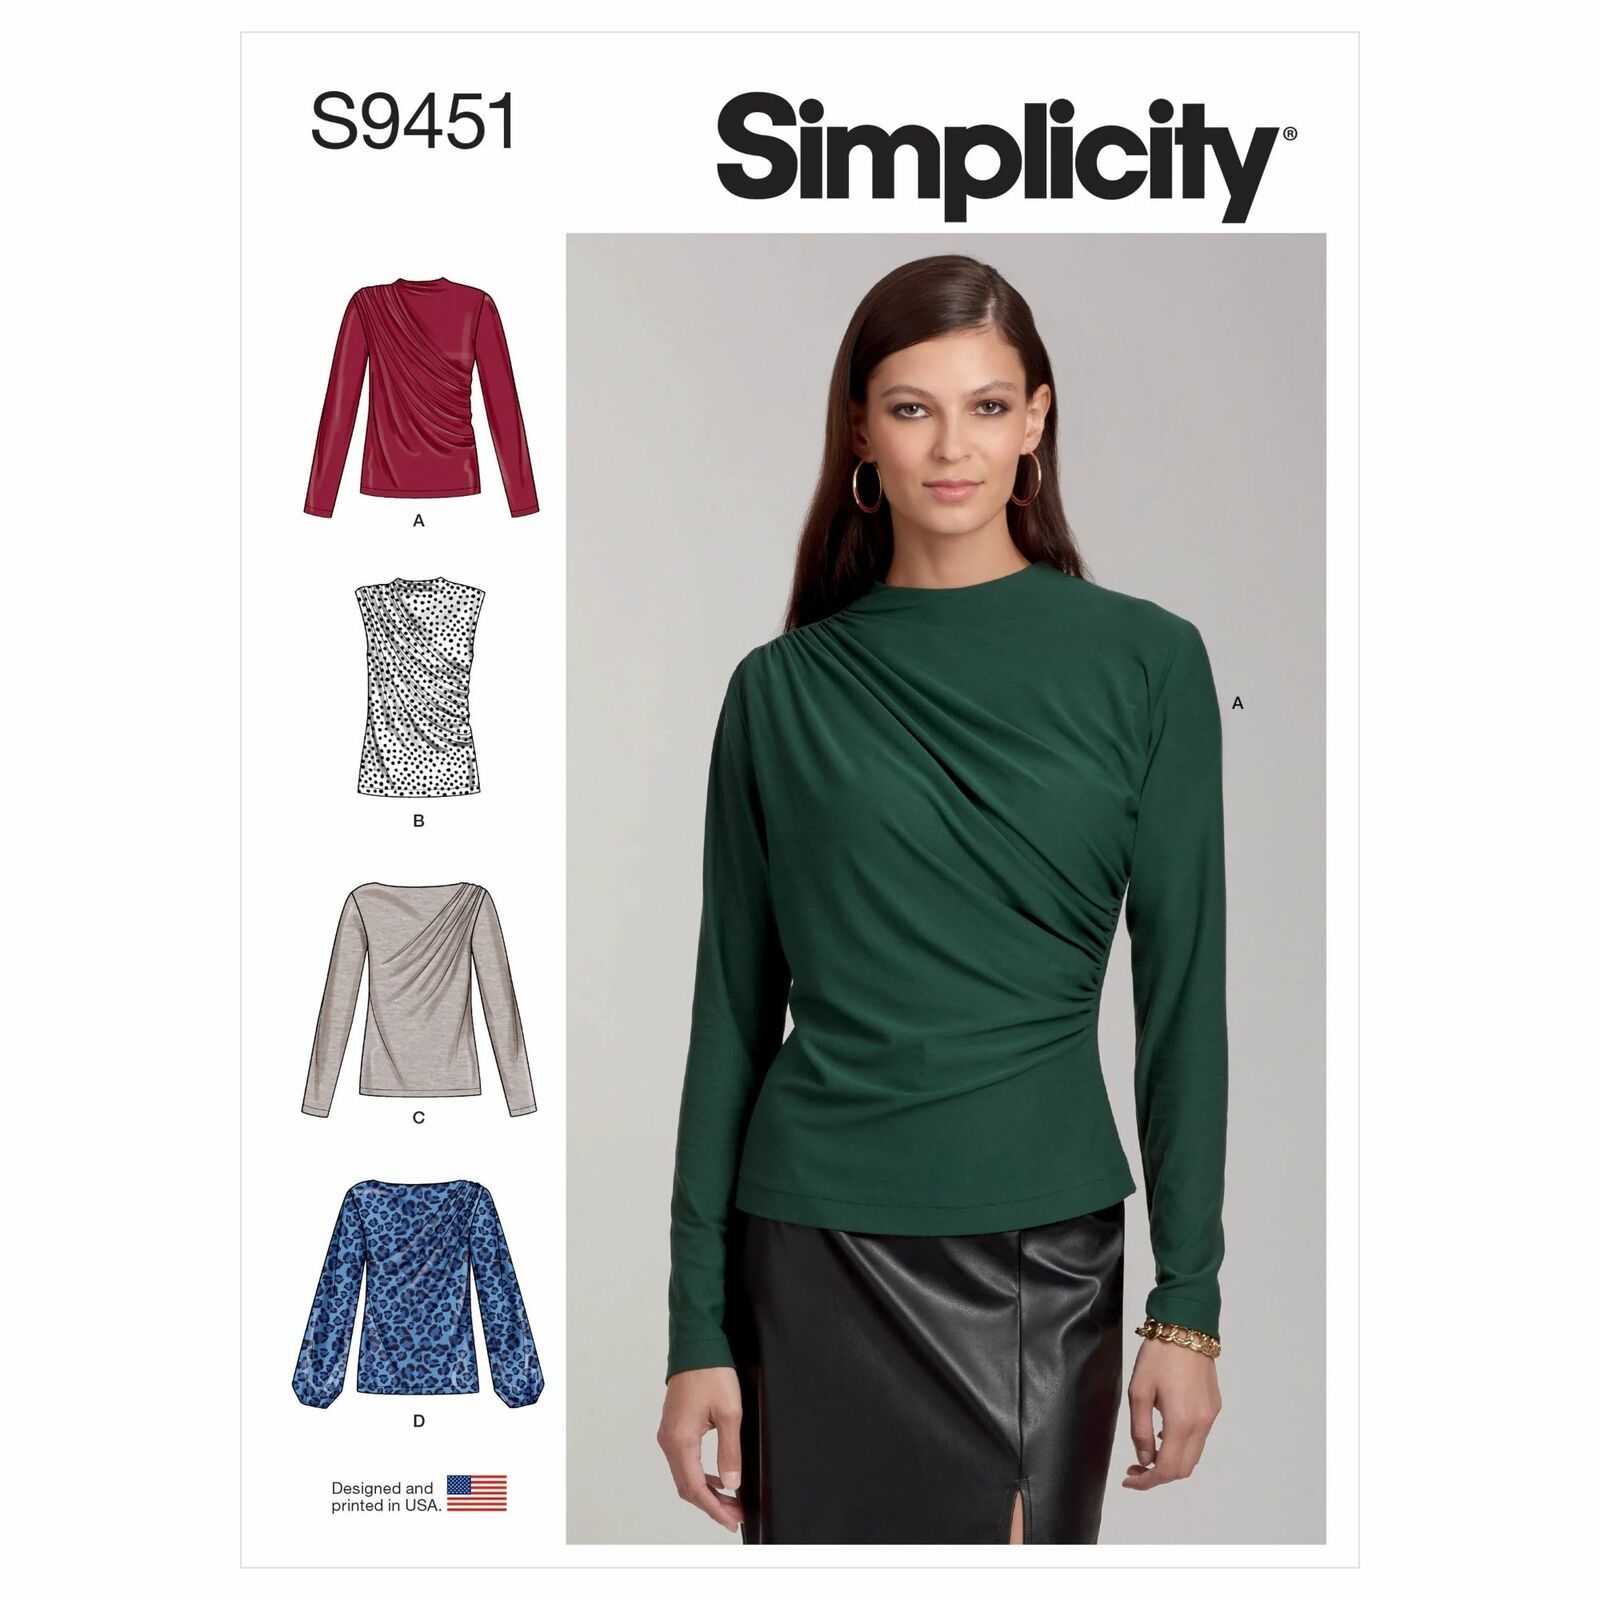 Simplicity Sewing Pattern 9451 11266 Knit Tops Misses Size 6-14 - $8.96